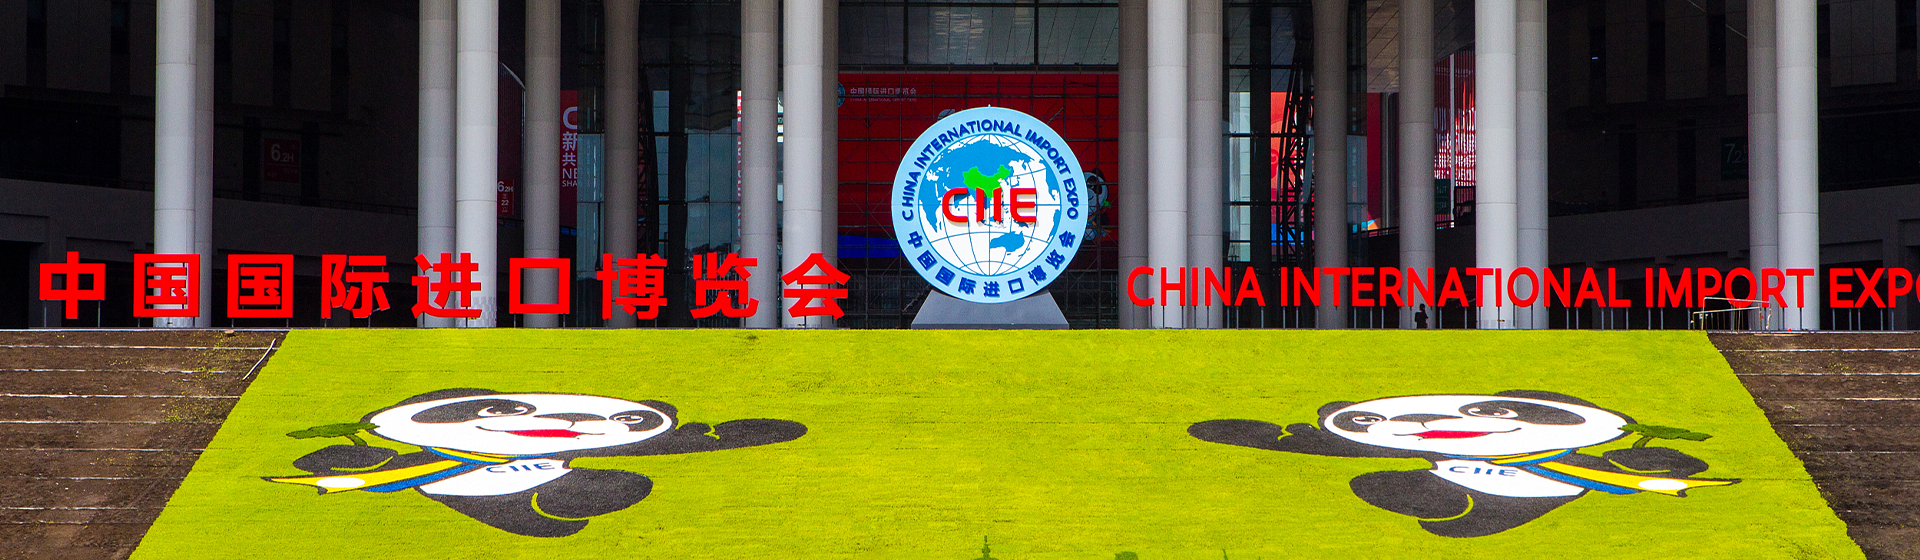 Fifth CIIE starts its 100-day countdown in Shanghai